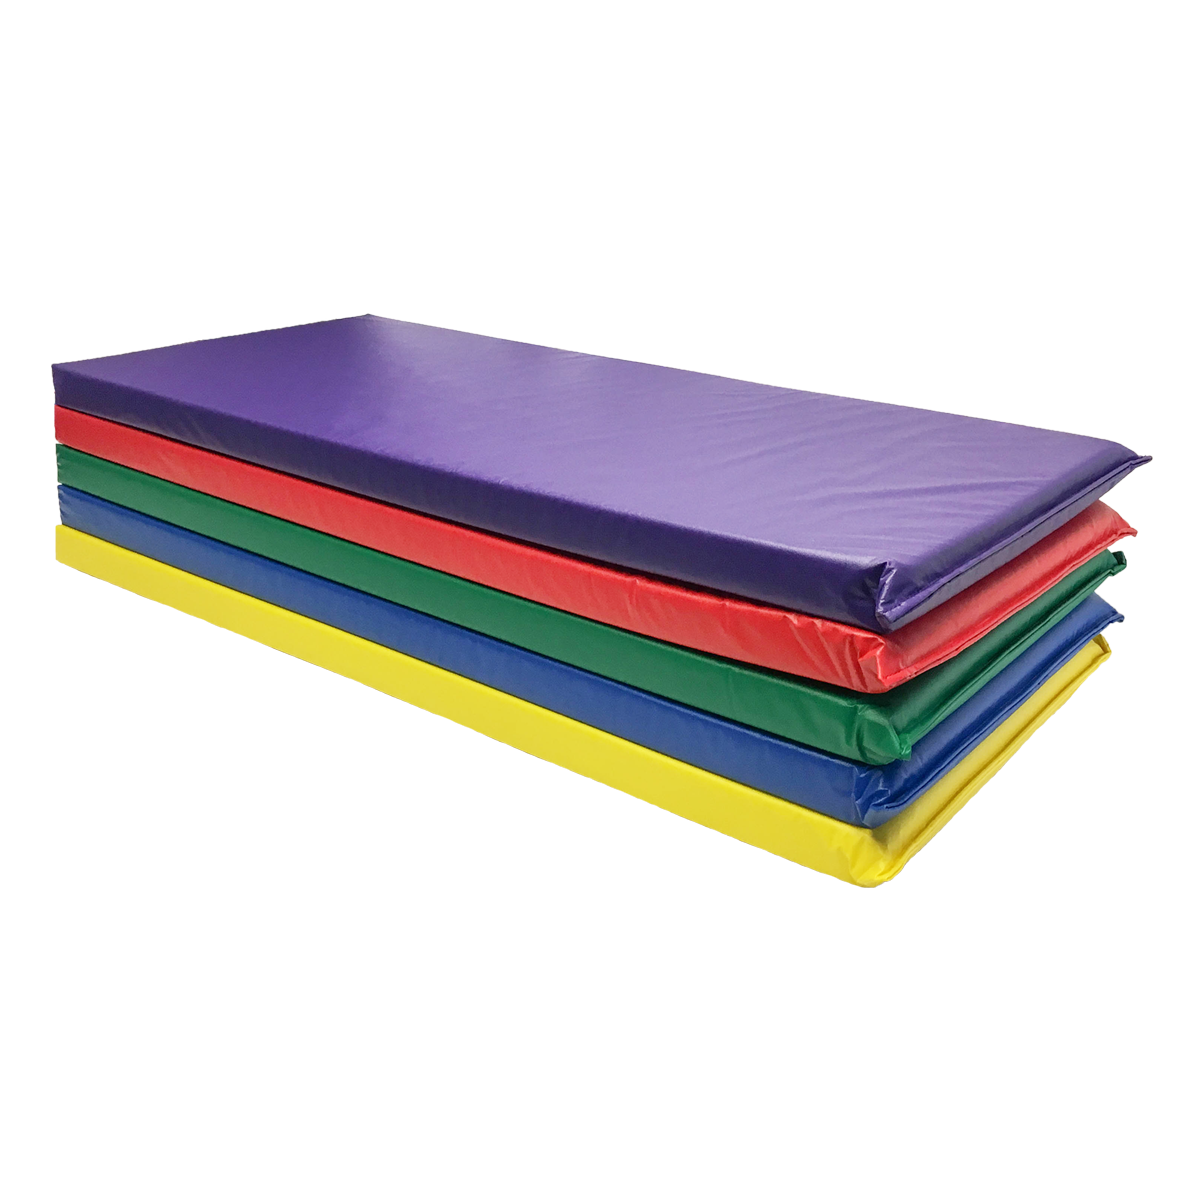 5 PACK OF 2" RAINBOW DESIGNER KINDERMATS (RED, YELLOW, GREEN, BLUE, PURPLE) + 5 FITTED SHEETS FOR RAINBOW MATS